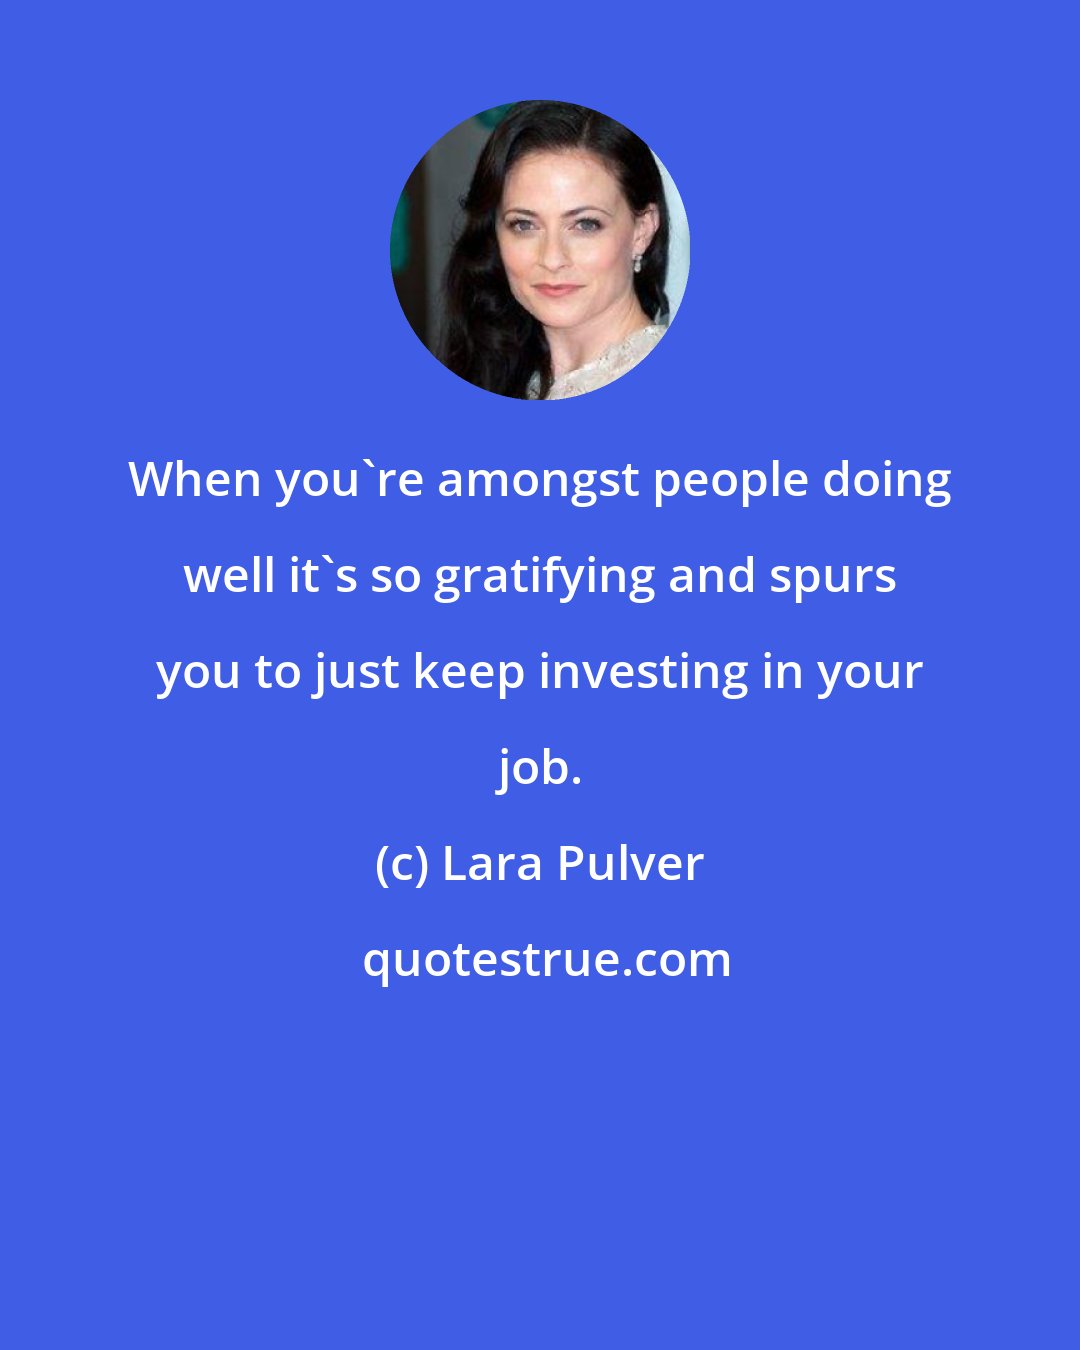 Lara Pulver: When you're amongst people doing well it's so gratifying and spurs you to just keep investing in your job.